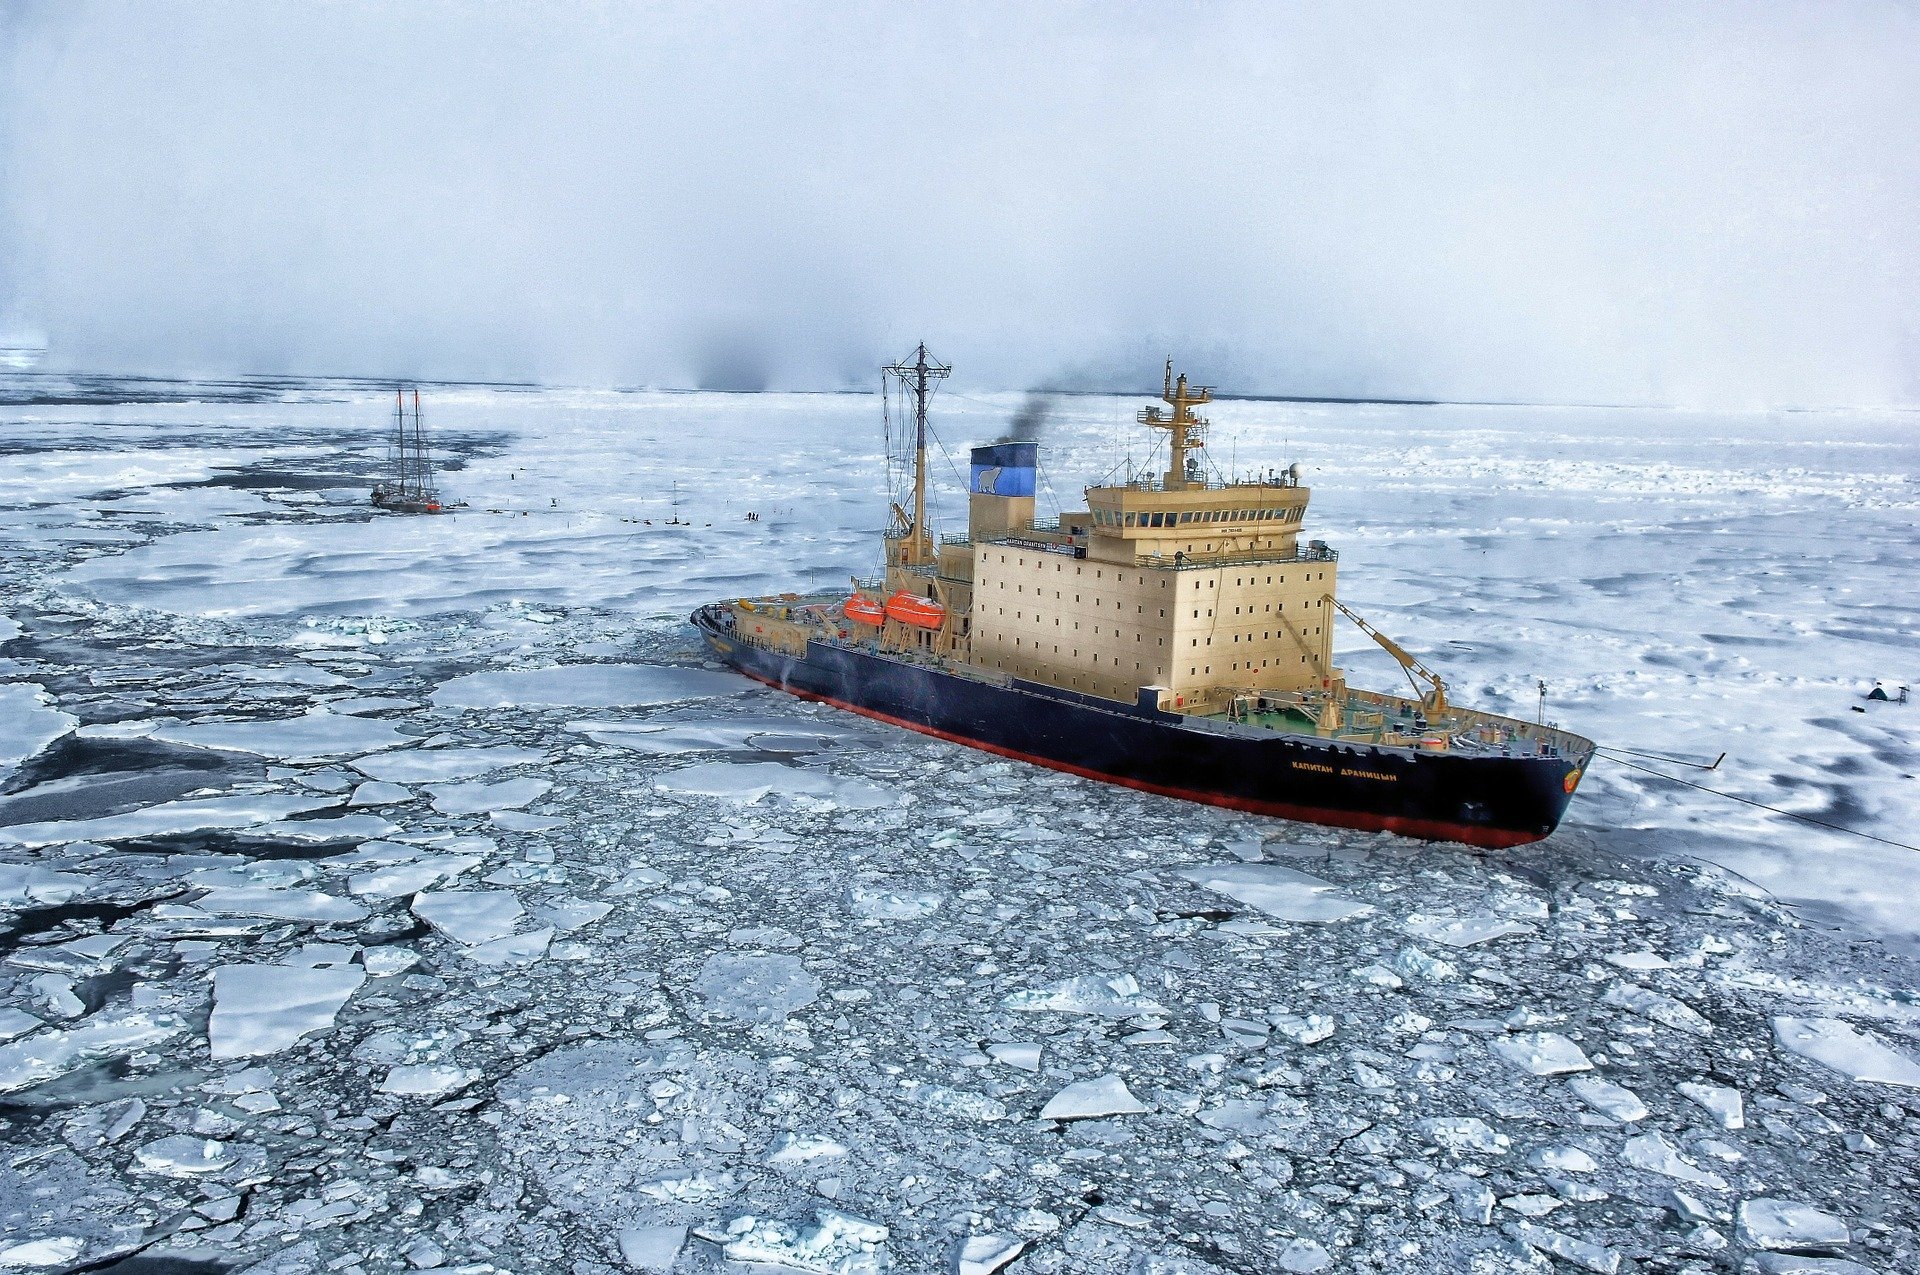 Orange provided 19 Sovcomflot vessels with satellite communications in the Arctic and the Far East